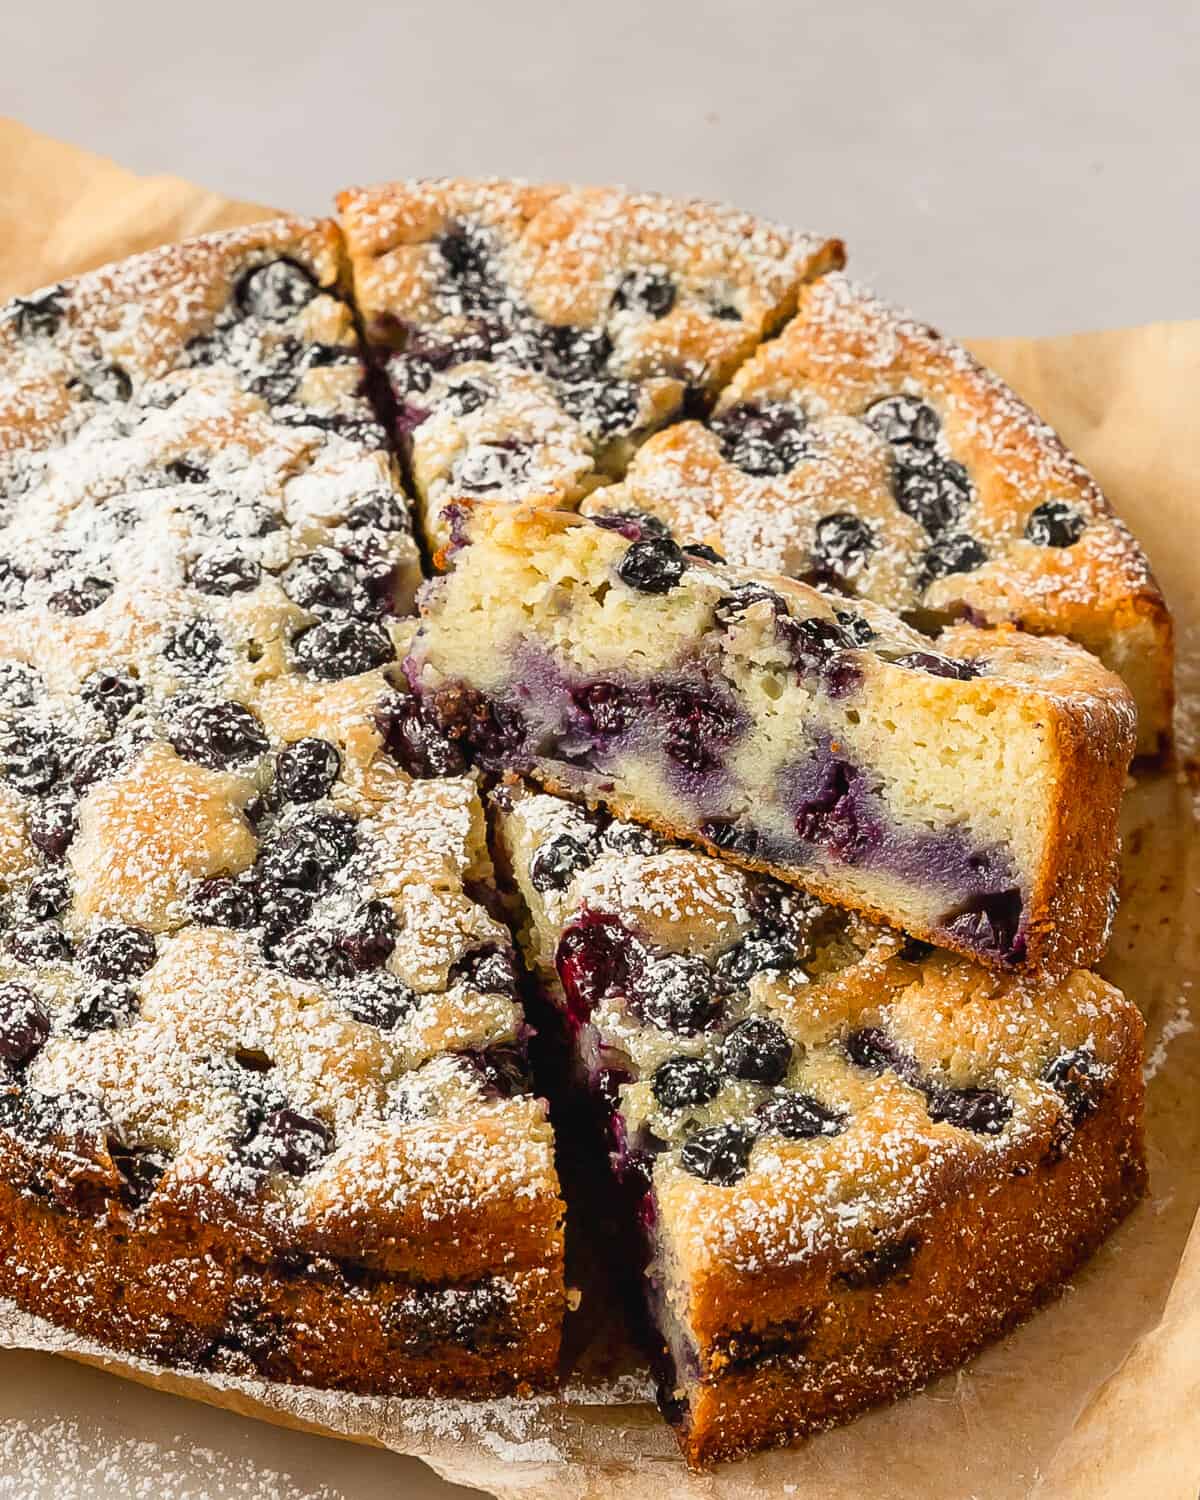 Blueberry ricotta cake is a deliciously sweet and moist Italian cake cake made with creamy ricotta and fresh blueberries. This easy to make blueberry lemon ricotta cake has a rich clafoutis like texture with a hint of bright lemon flavor. Make this ricotta blueberry cake for breakfast, dessert or anytime you need a simple, but stunning Italian cake.